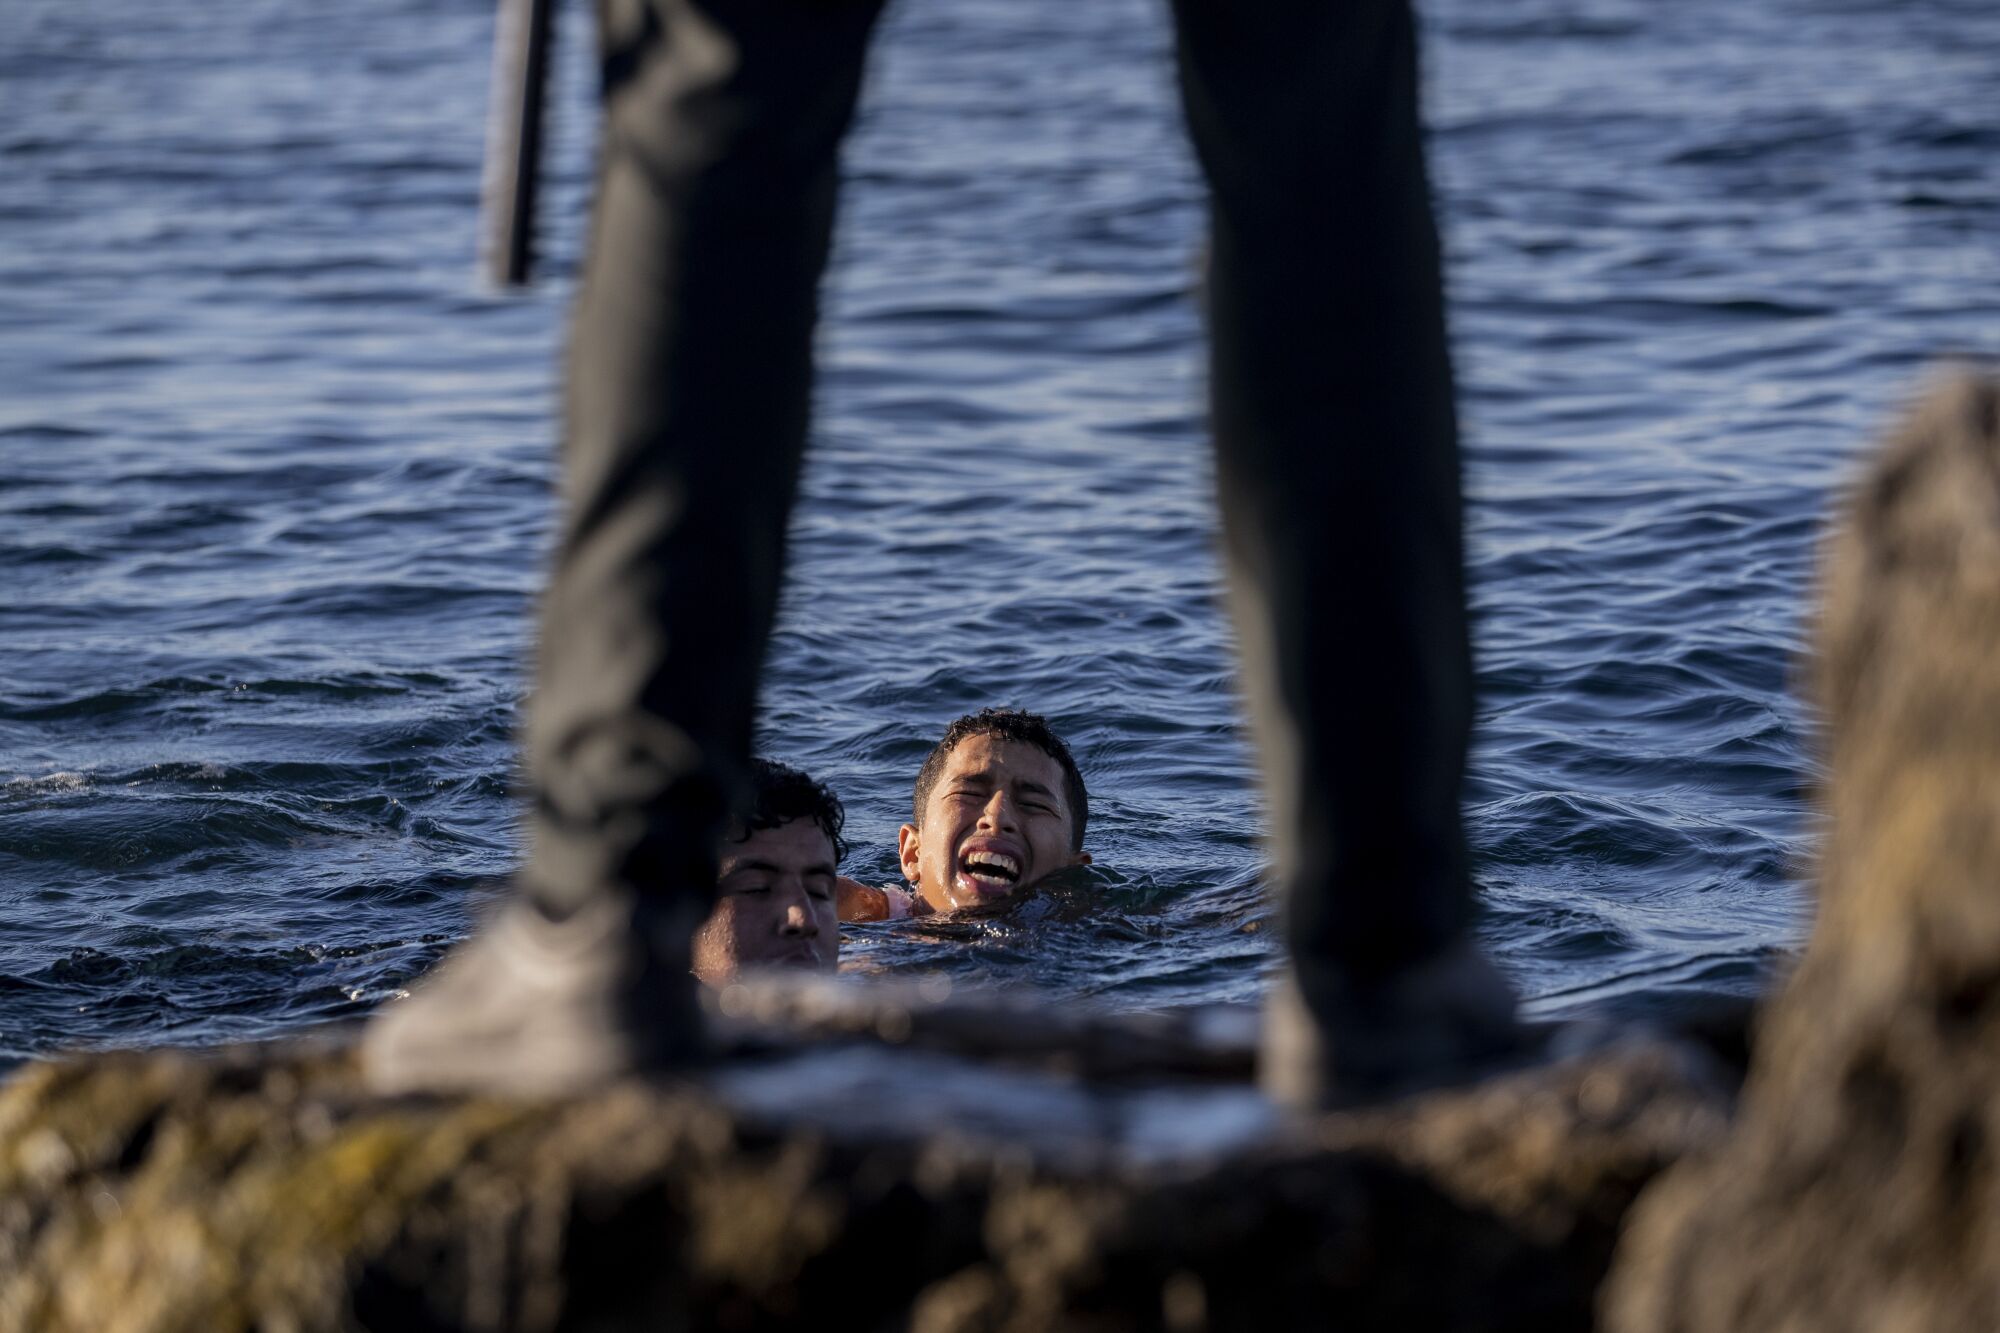 Two young men swimming onto shore are seen between the legs of a police officer standing on a rock